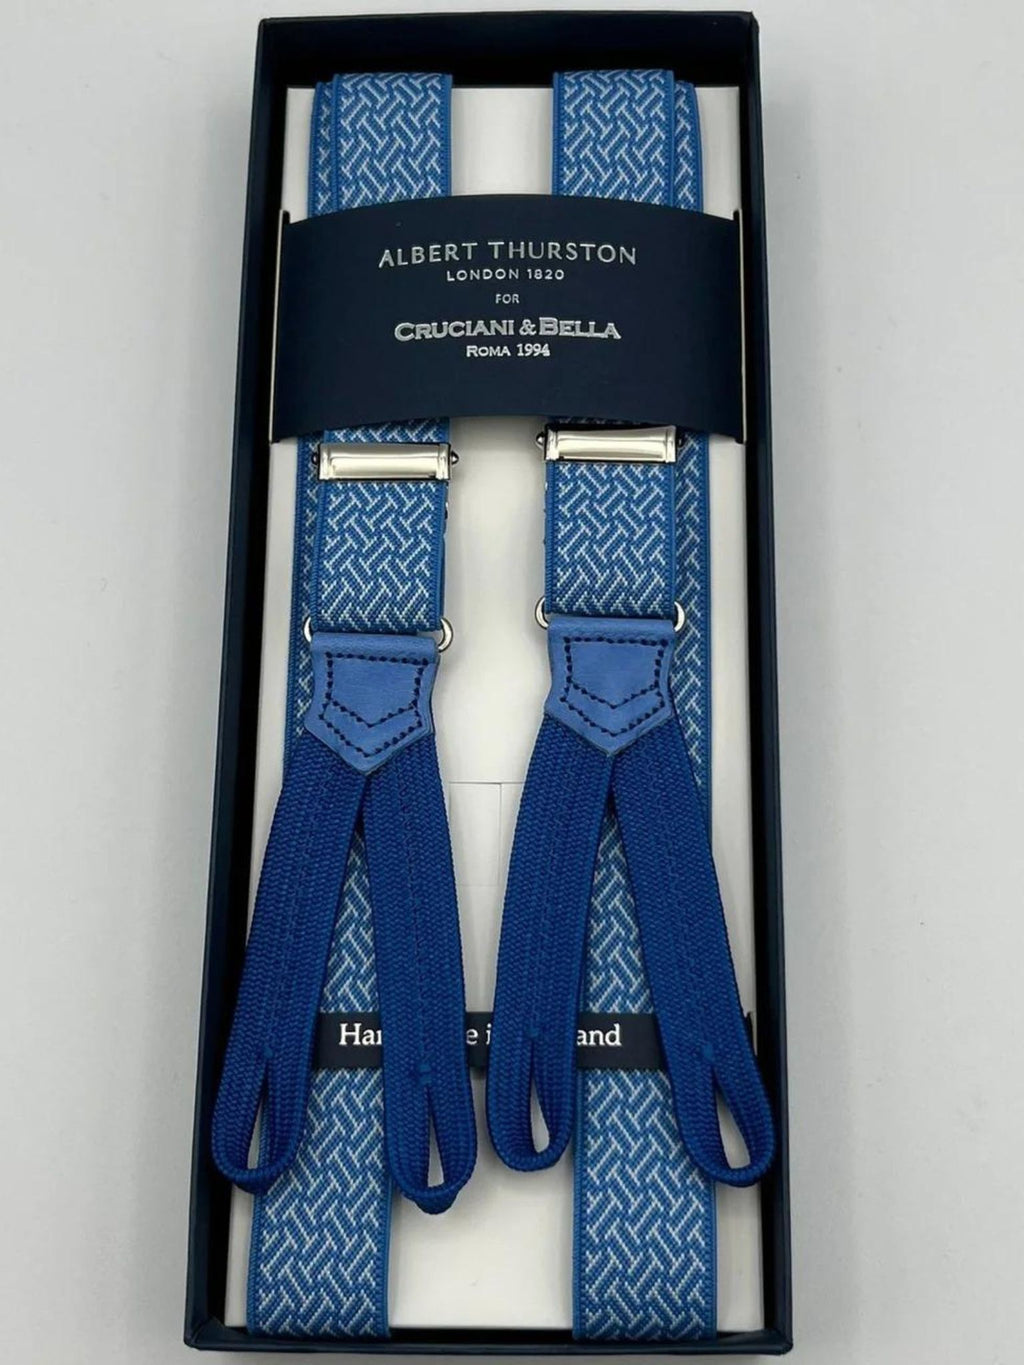 Albert Thurston for Cruciani & Bella Made in England Adjustable Sizing 25 mm elastic braces Azure, White Motif Braid ends Y-Shaped Nickel  Fittings Size: L